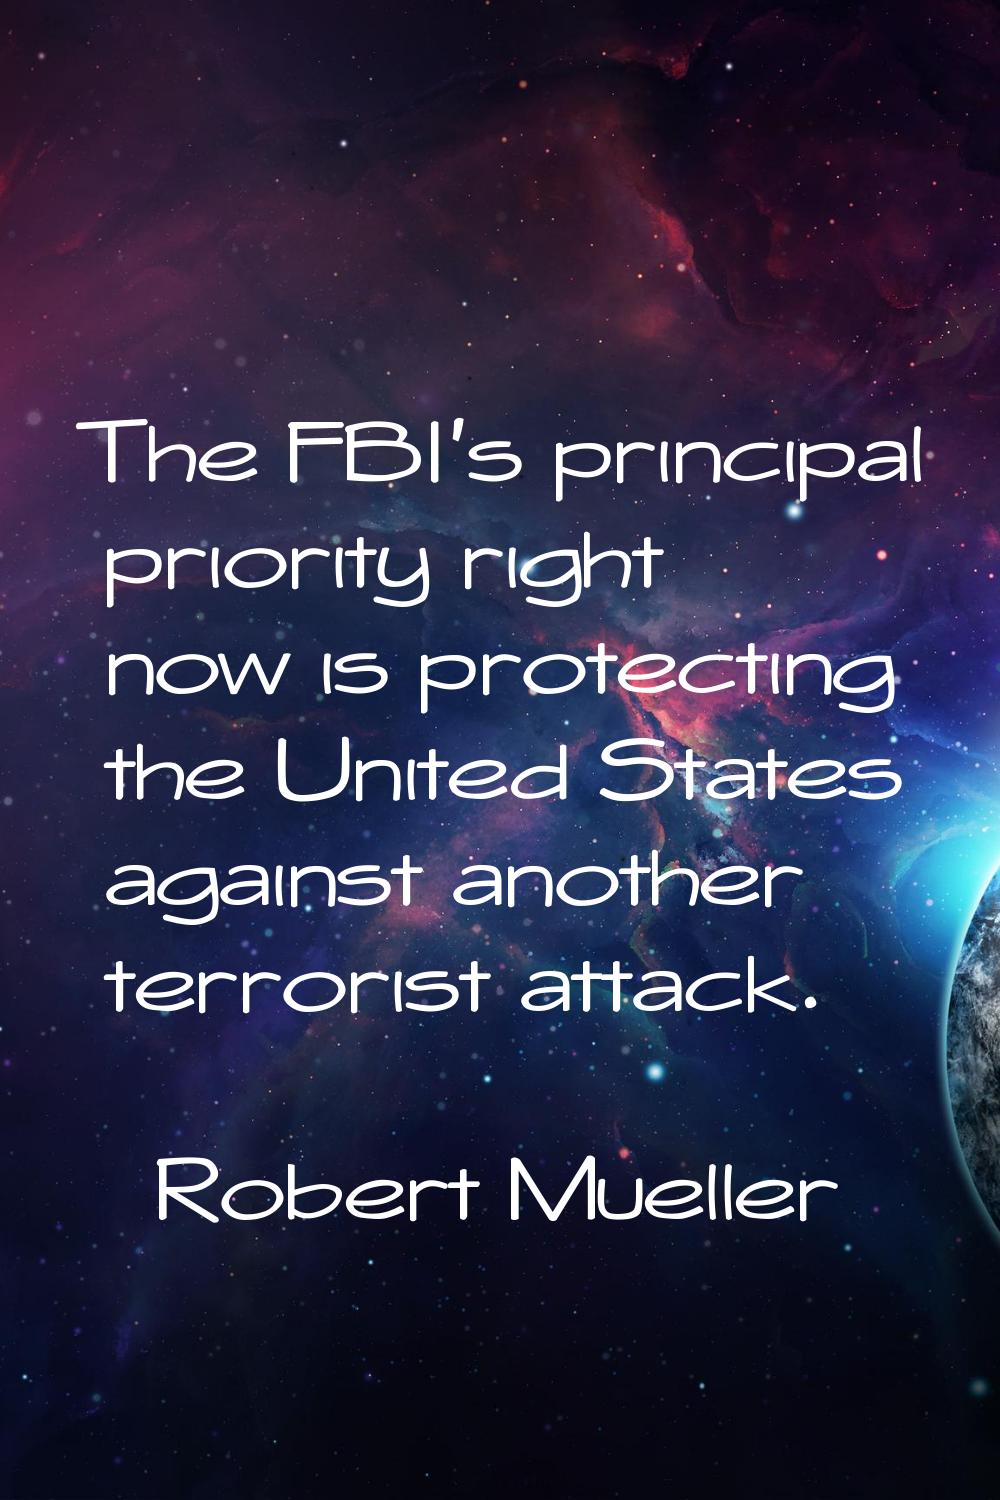 The FBI's principal priority right now is protecting the United States against another terrorist at